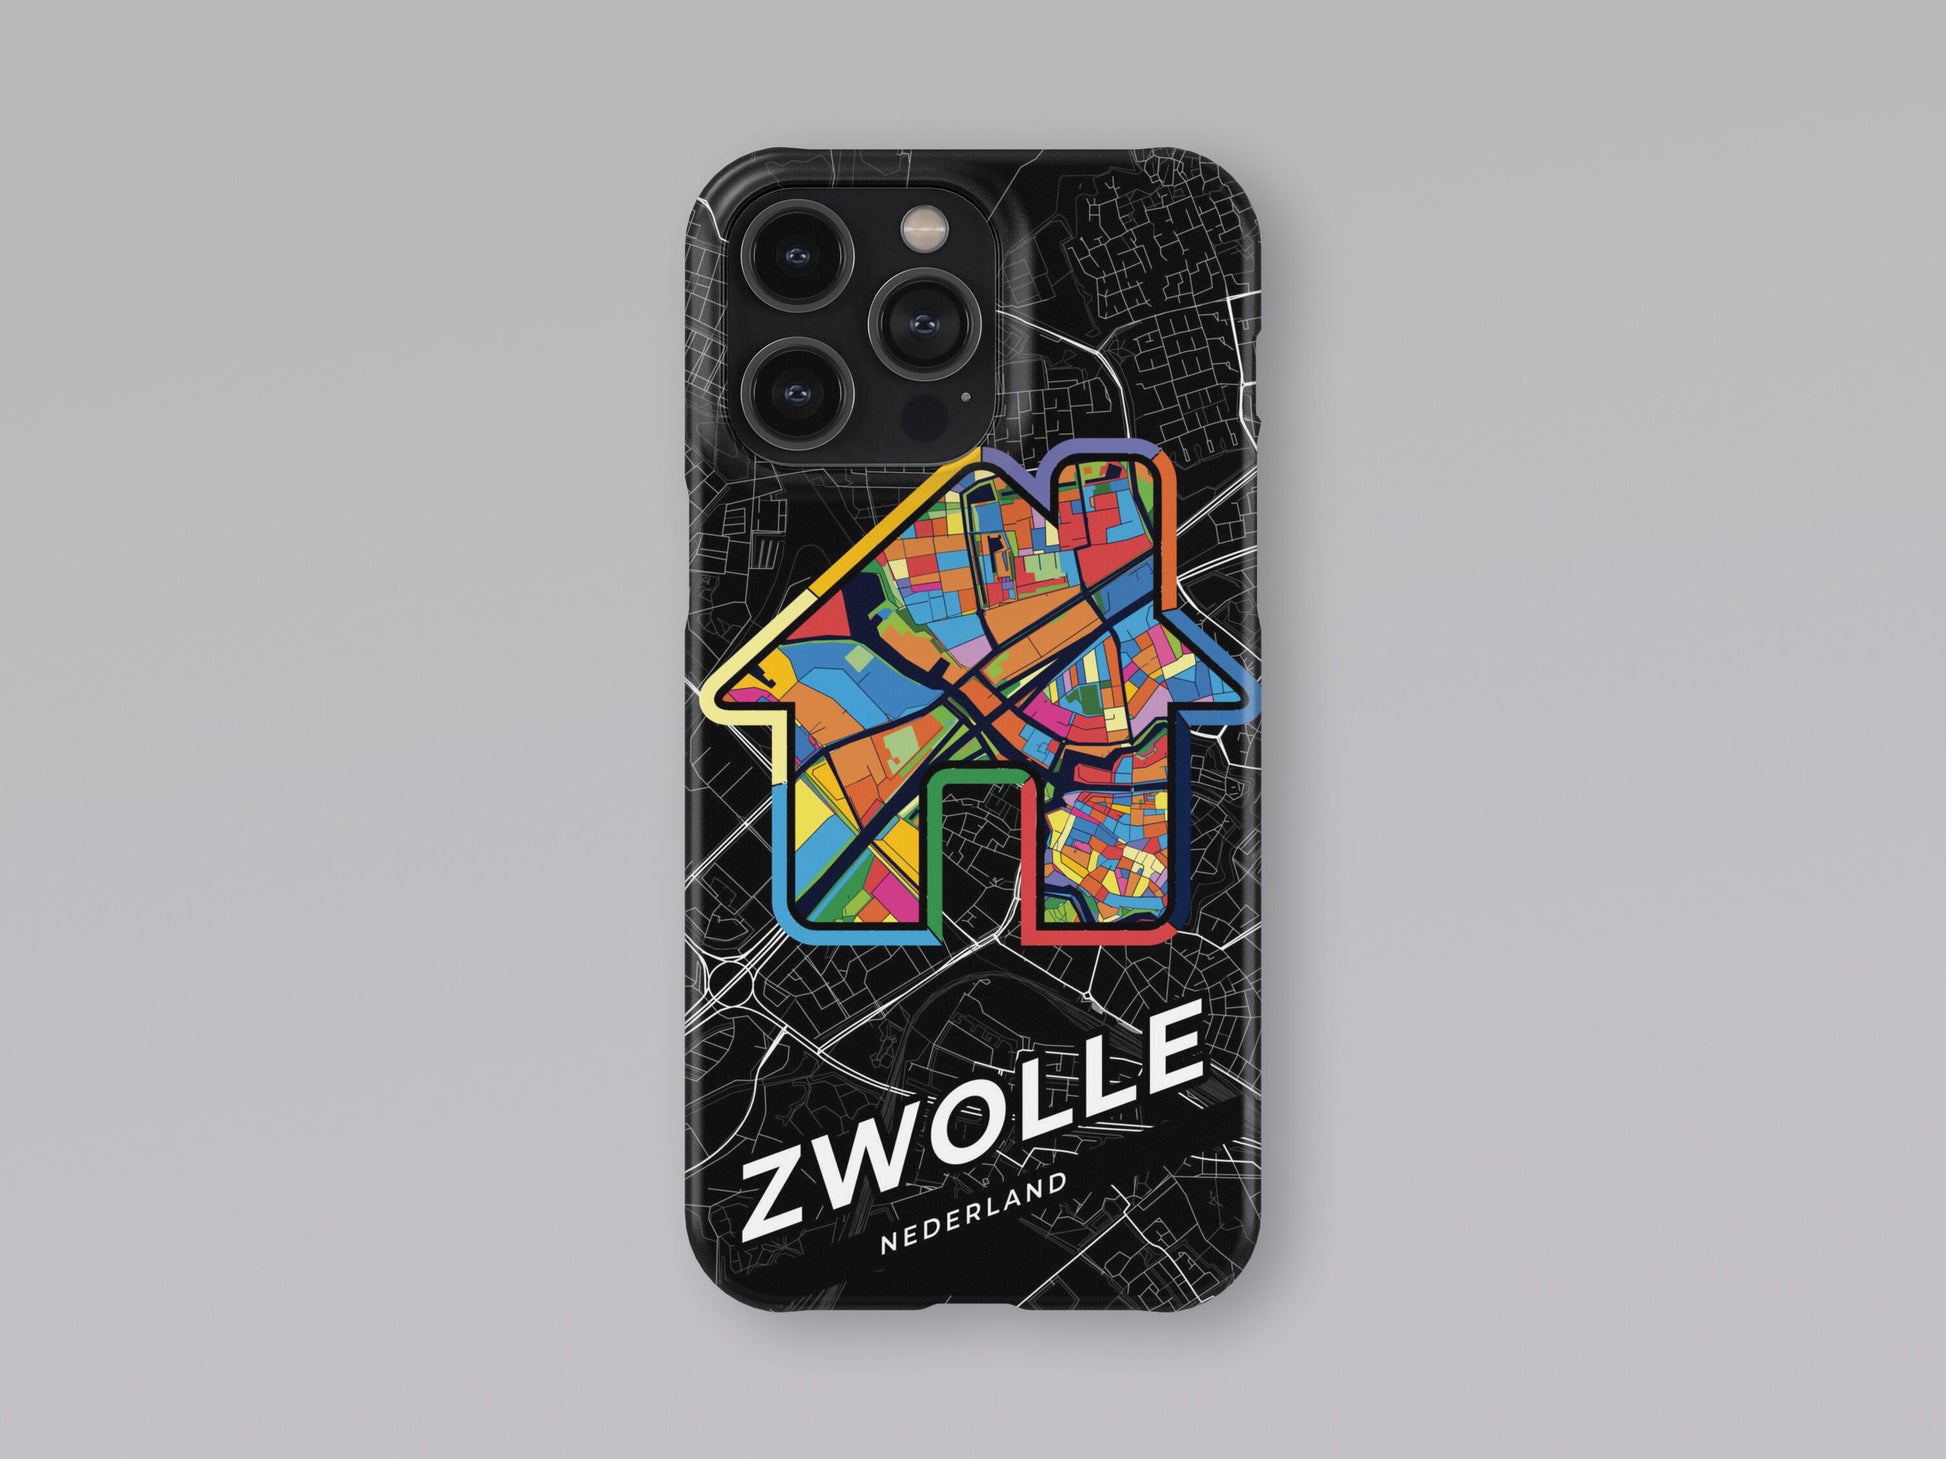 Zwolle Netherlands slim phone case with colorful icon 3